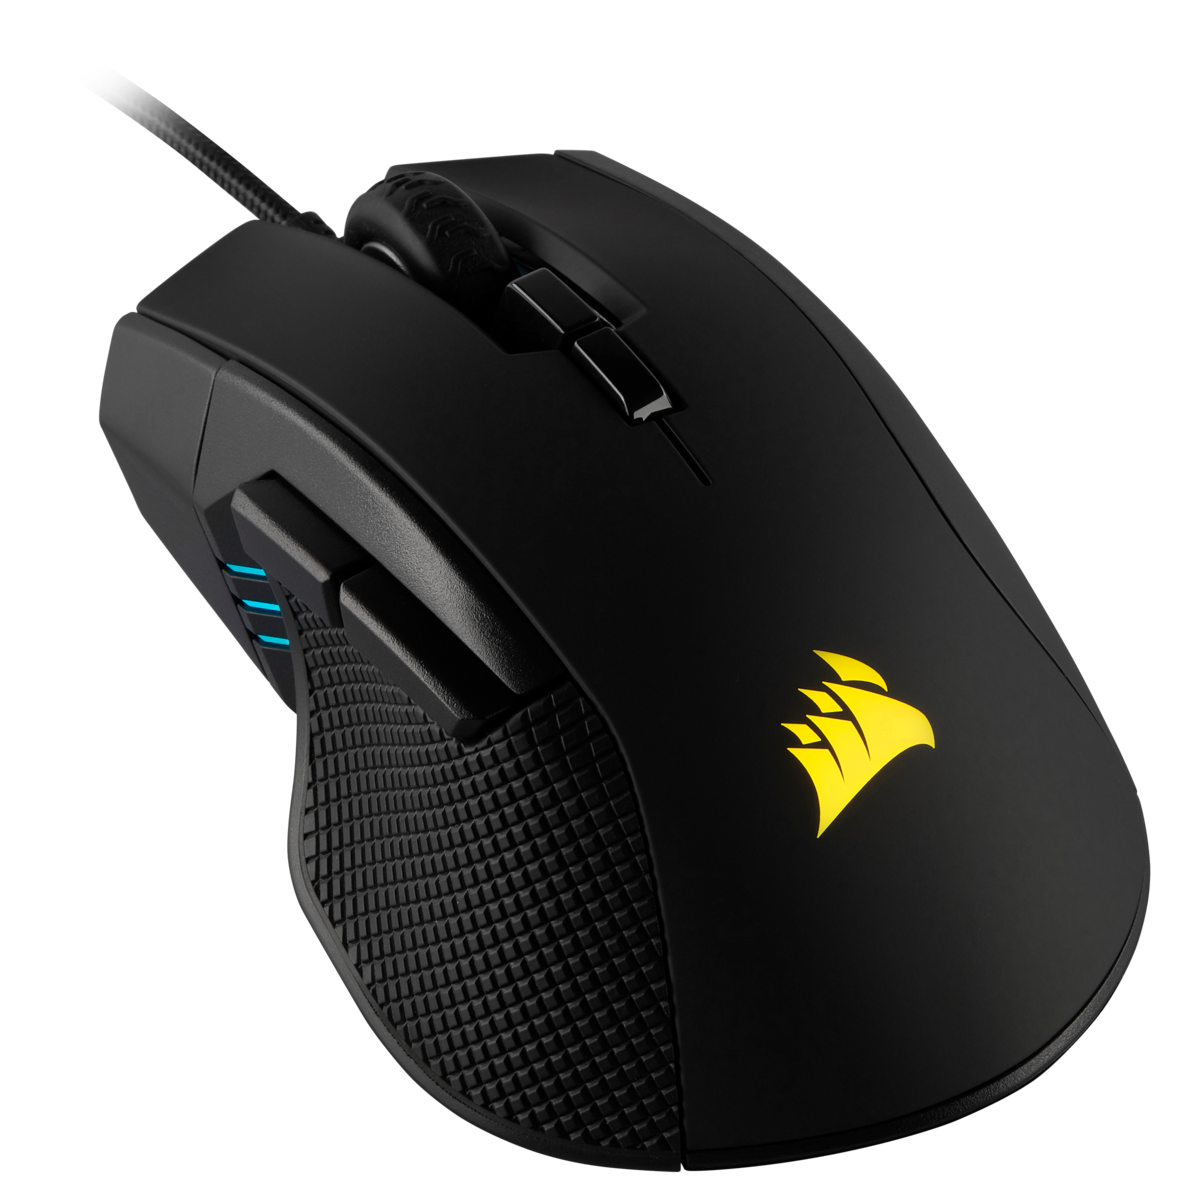 Corsair IRONCLAW RGB FPS/MOBA Gaming Mouse 電競遊戲滑鼠